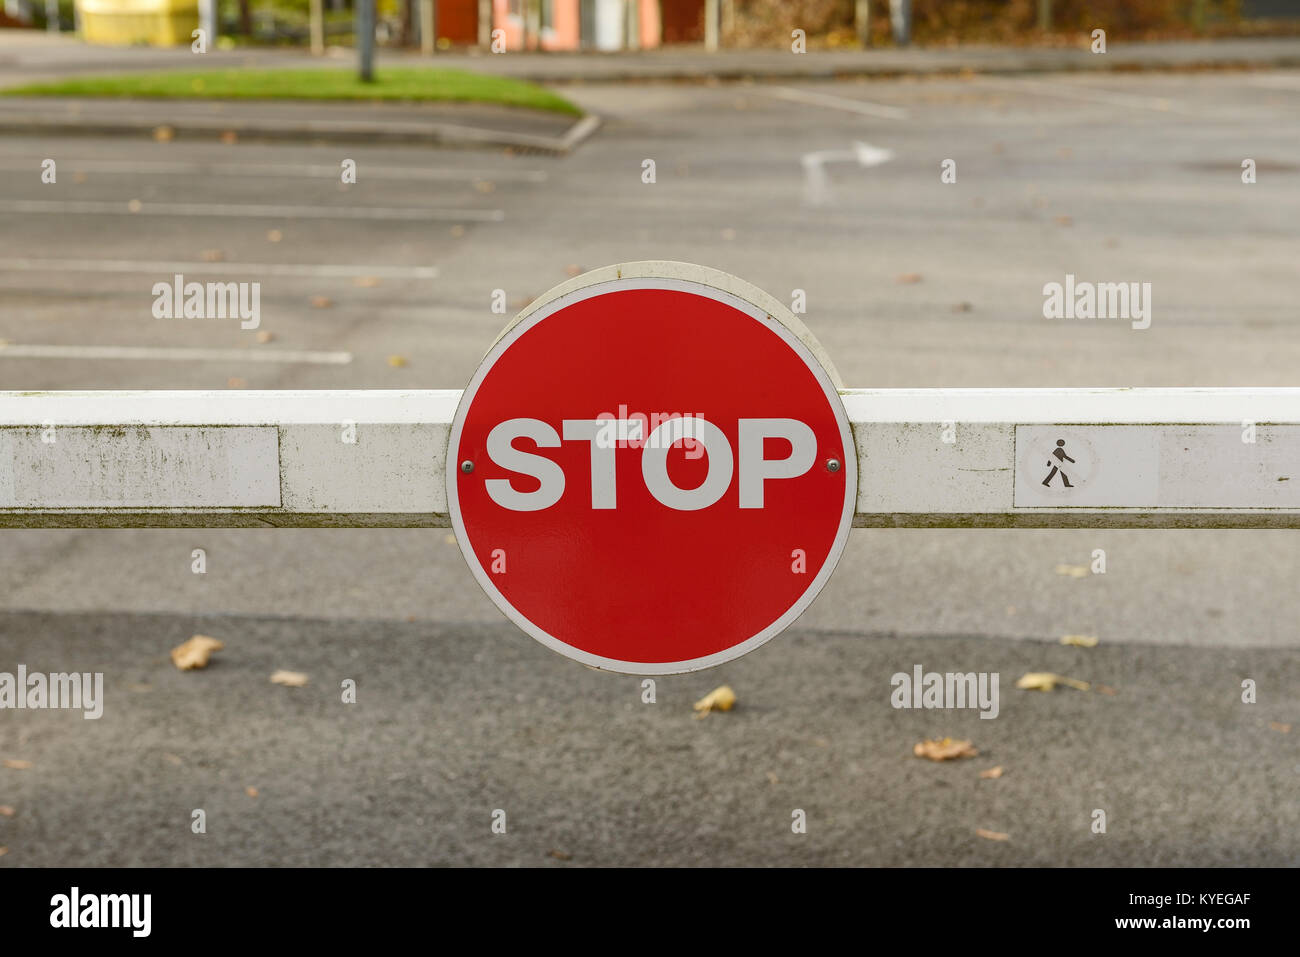 Stop sign on a car park barrier Stock Photo